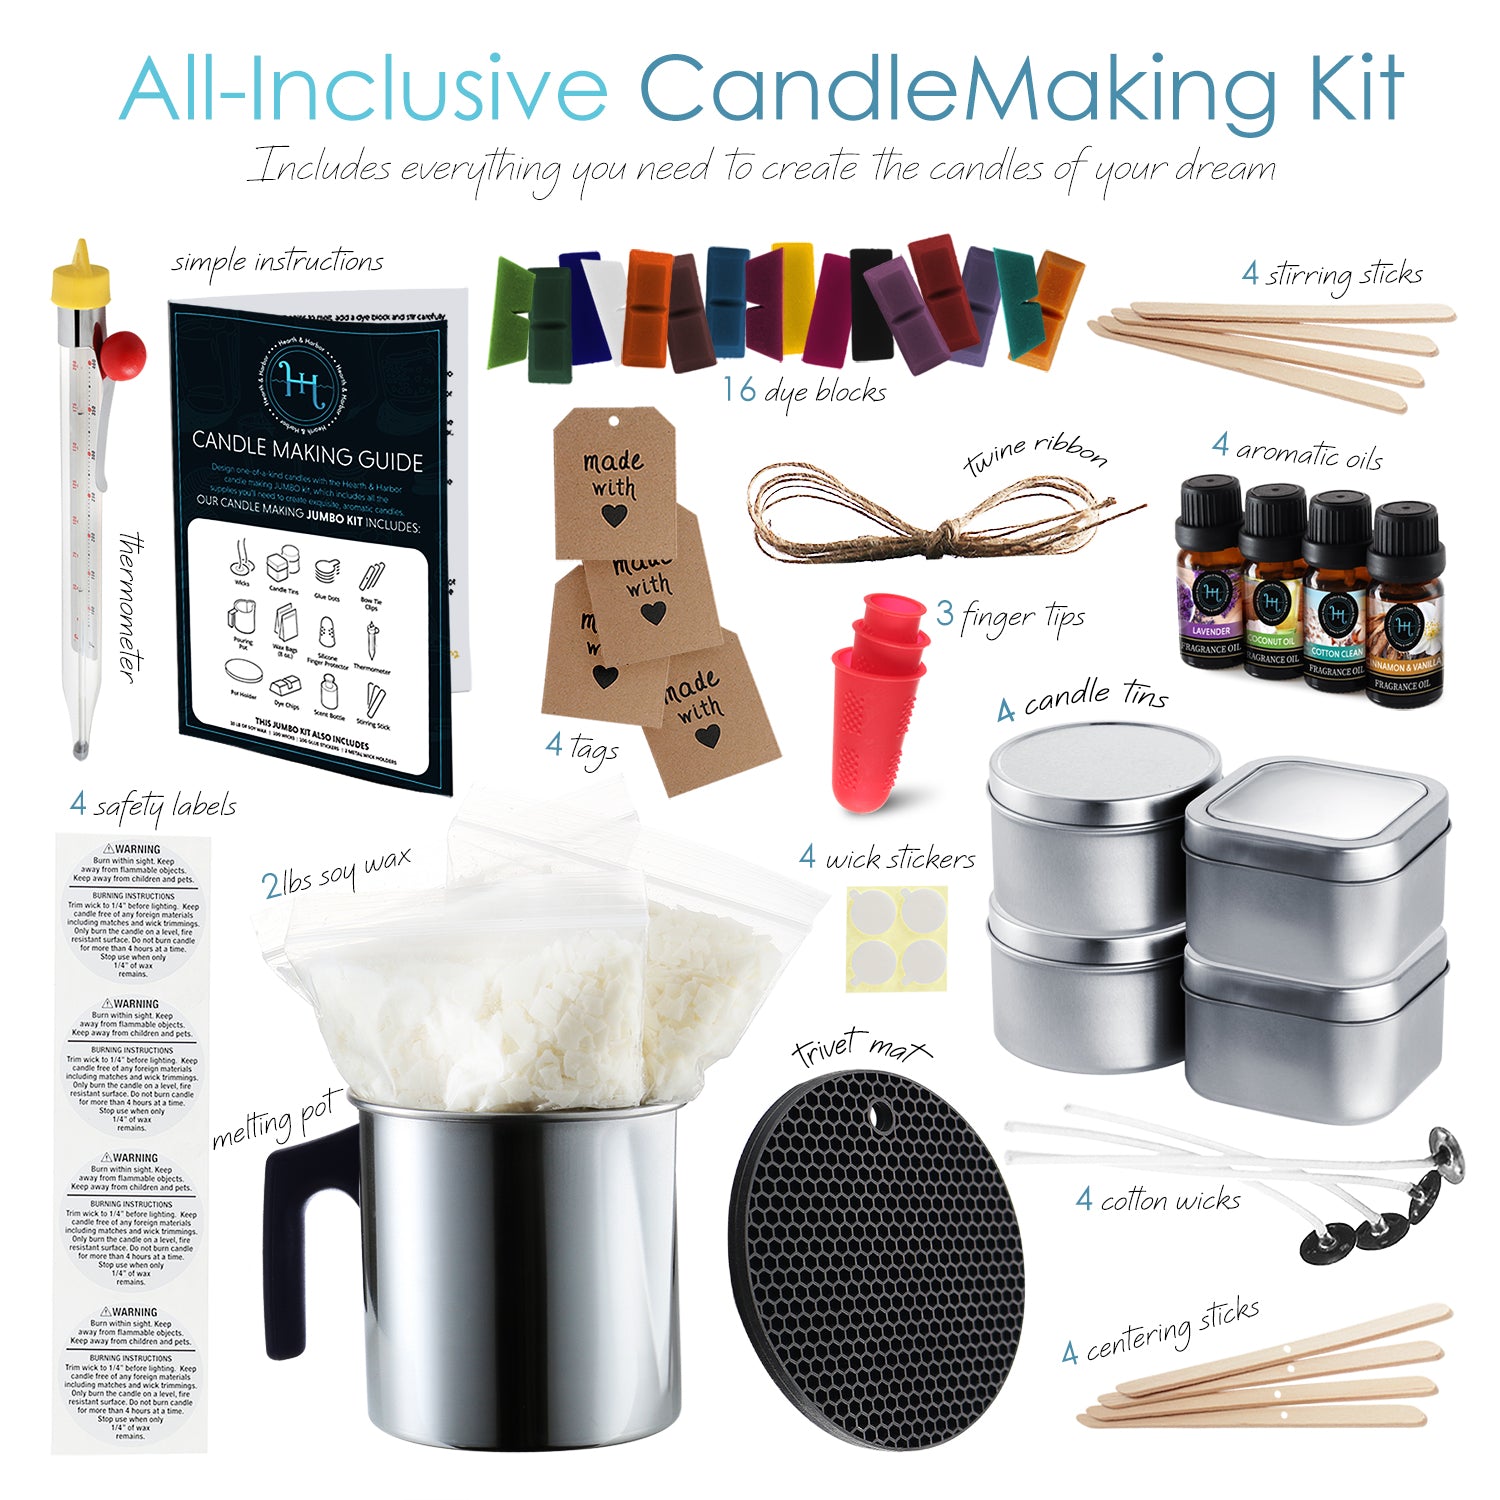 Hearth & Harbor DIY Candle Making Kit For Adults - Complete Set of Can –  Cozy Array